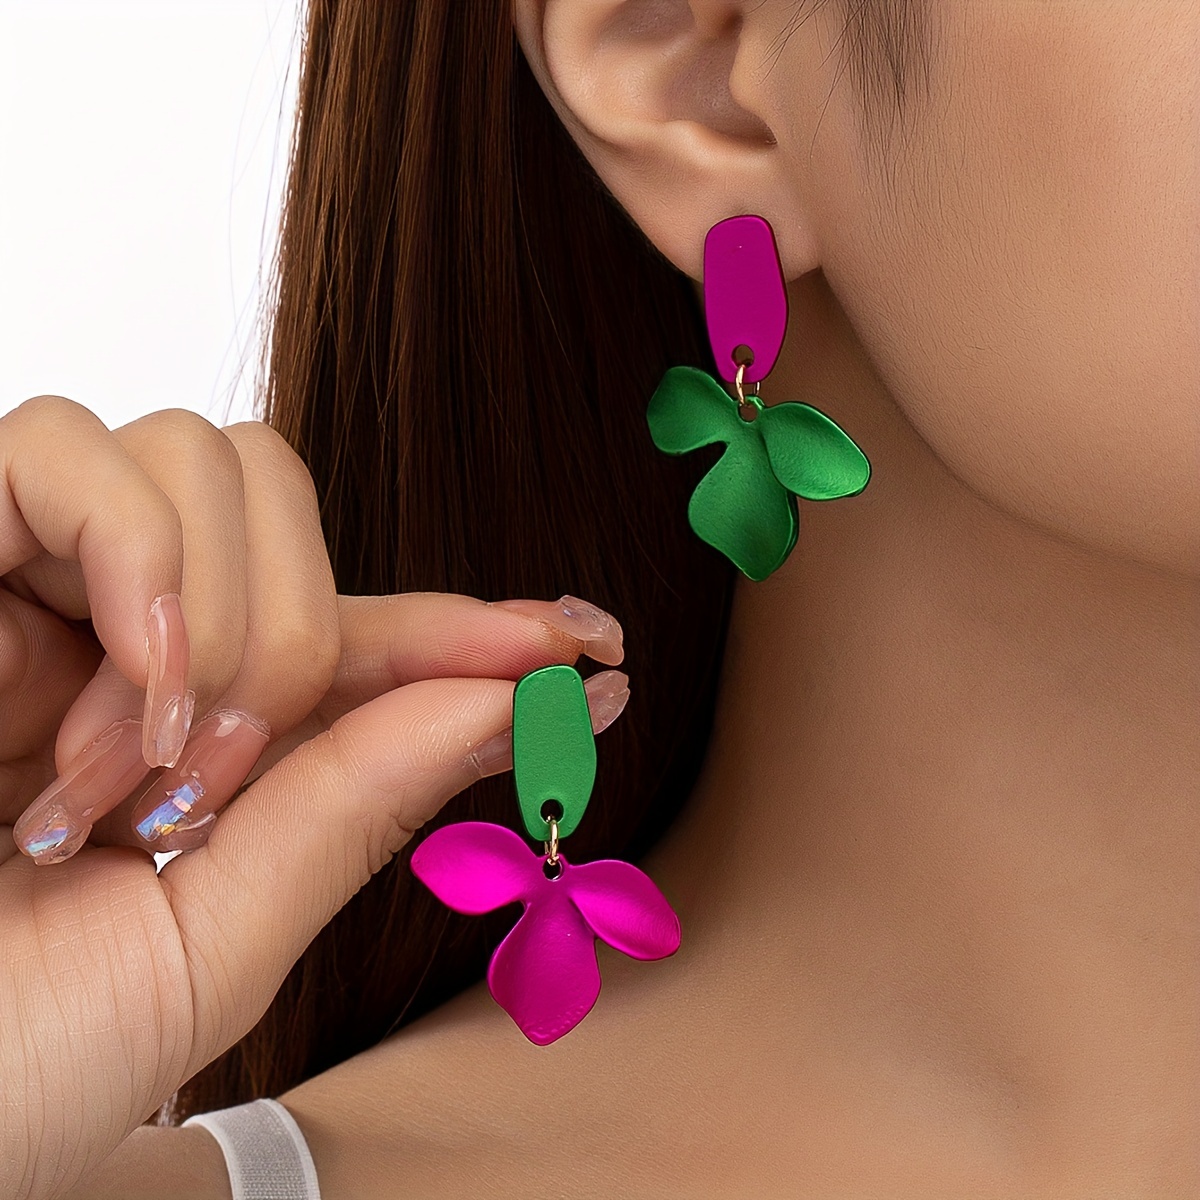 

Green & Pink Bright Color Dangle Earrings Bohemian Elegant Style Fall Winter Holiday Ear Ornaments Female Gift